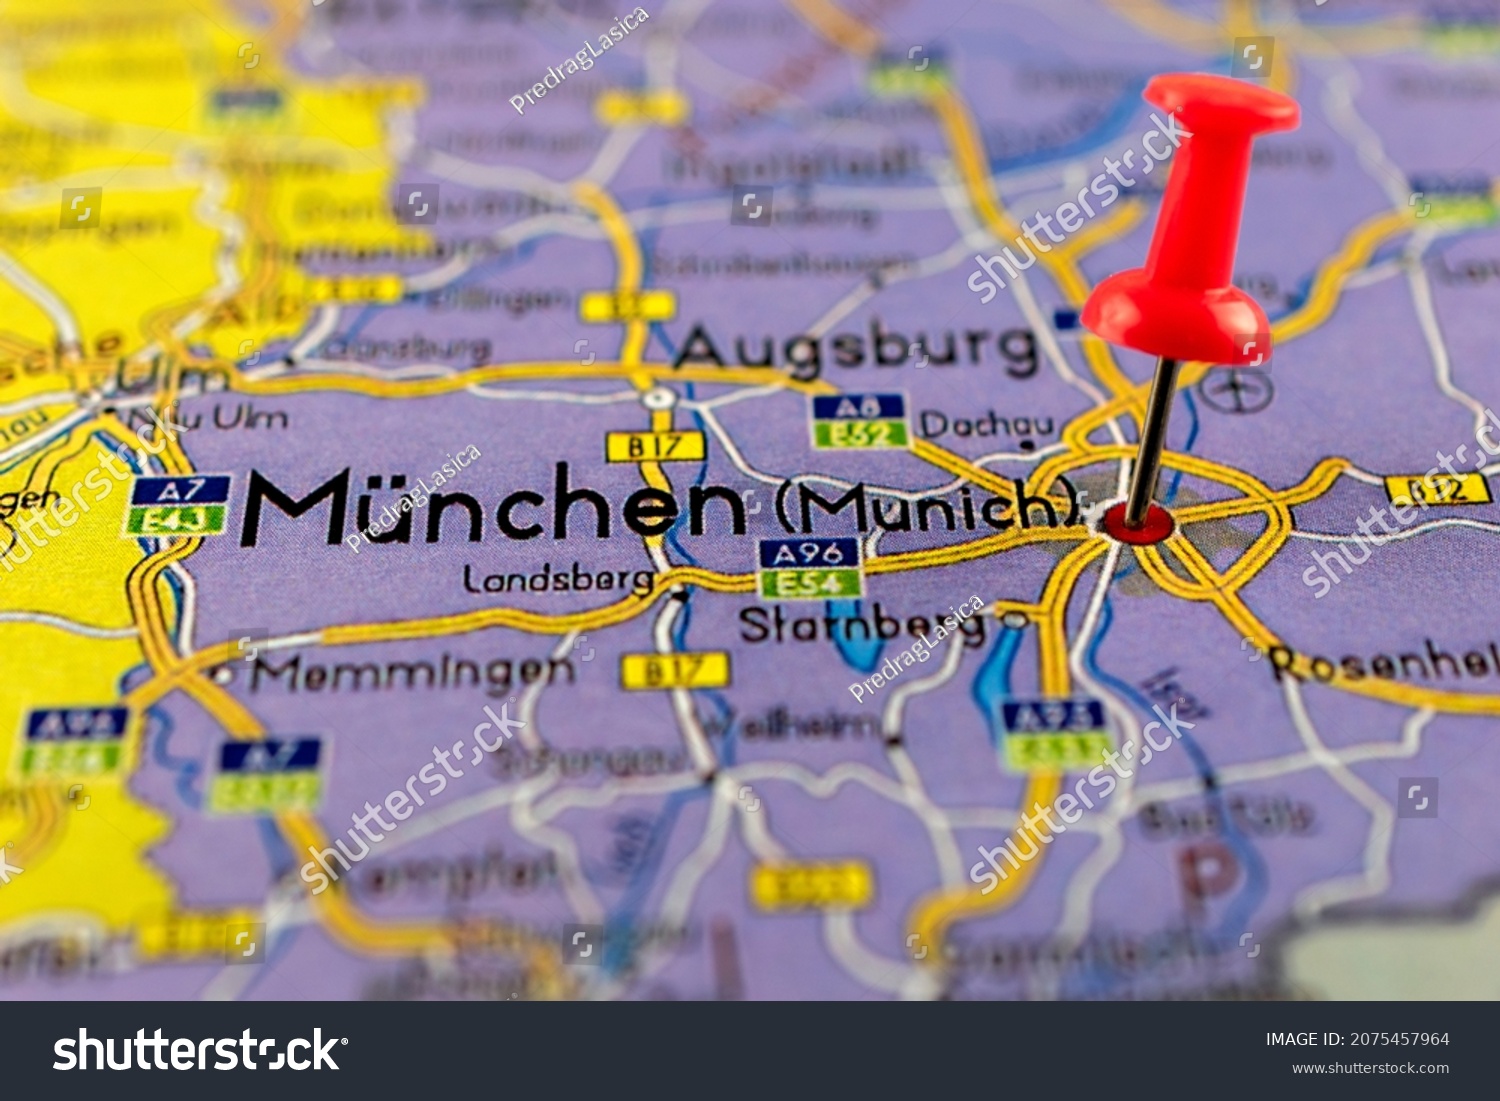 Stock Photo Close Up Of Munich Map With Red Pin Map With Red Pin Point Of M Nchen In Germany 2075457964 